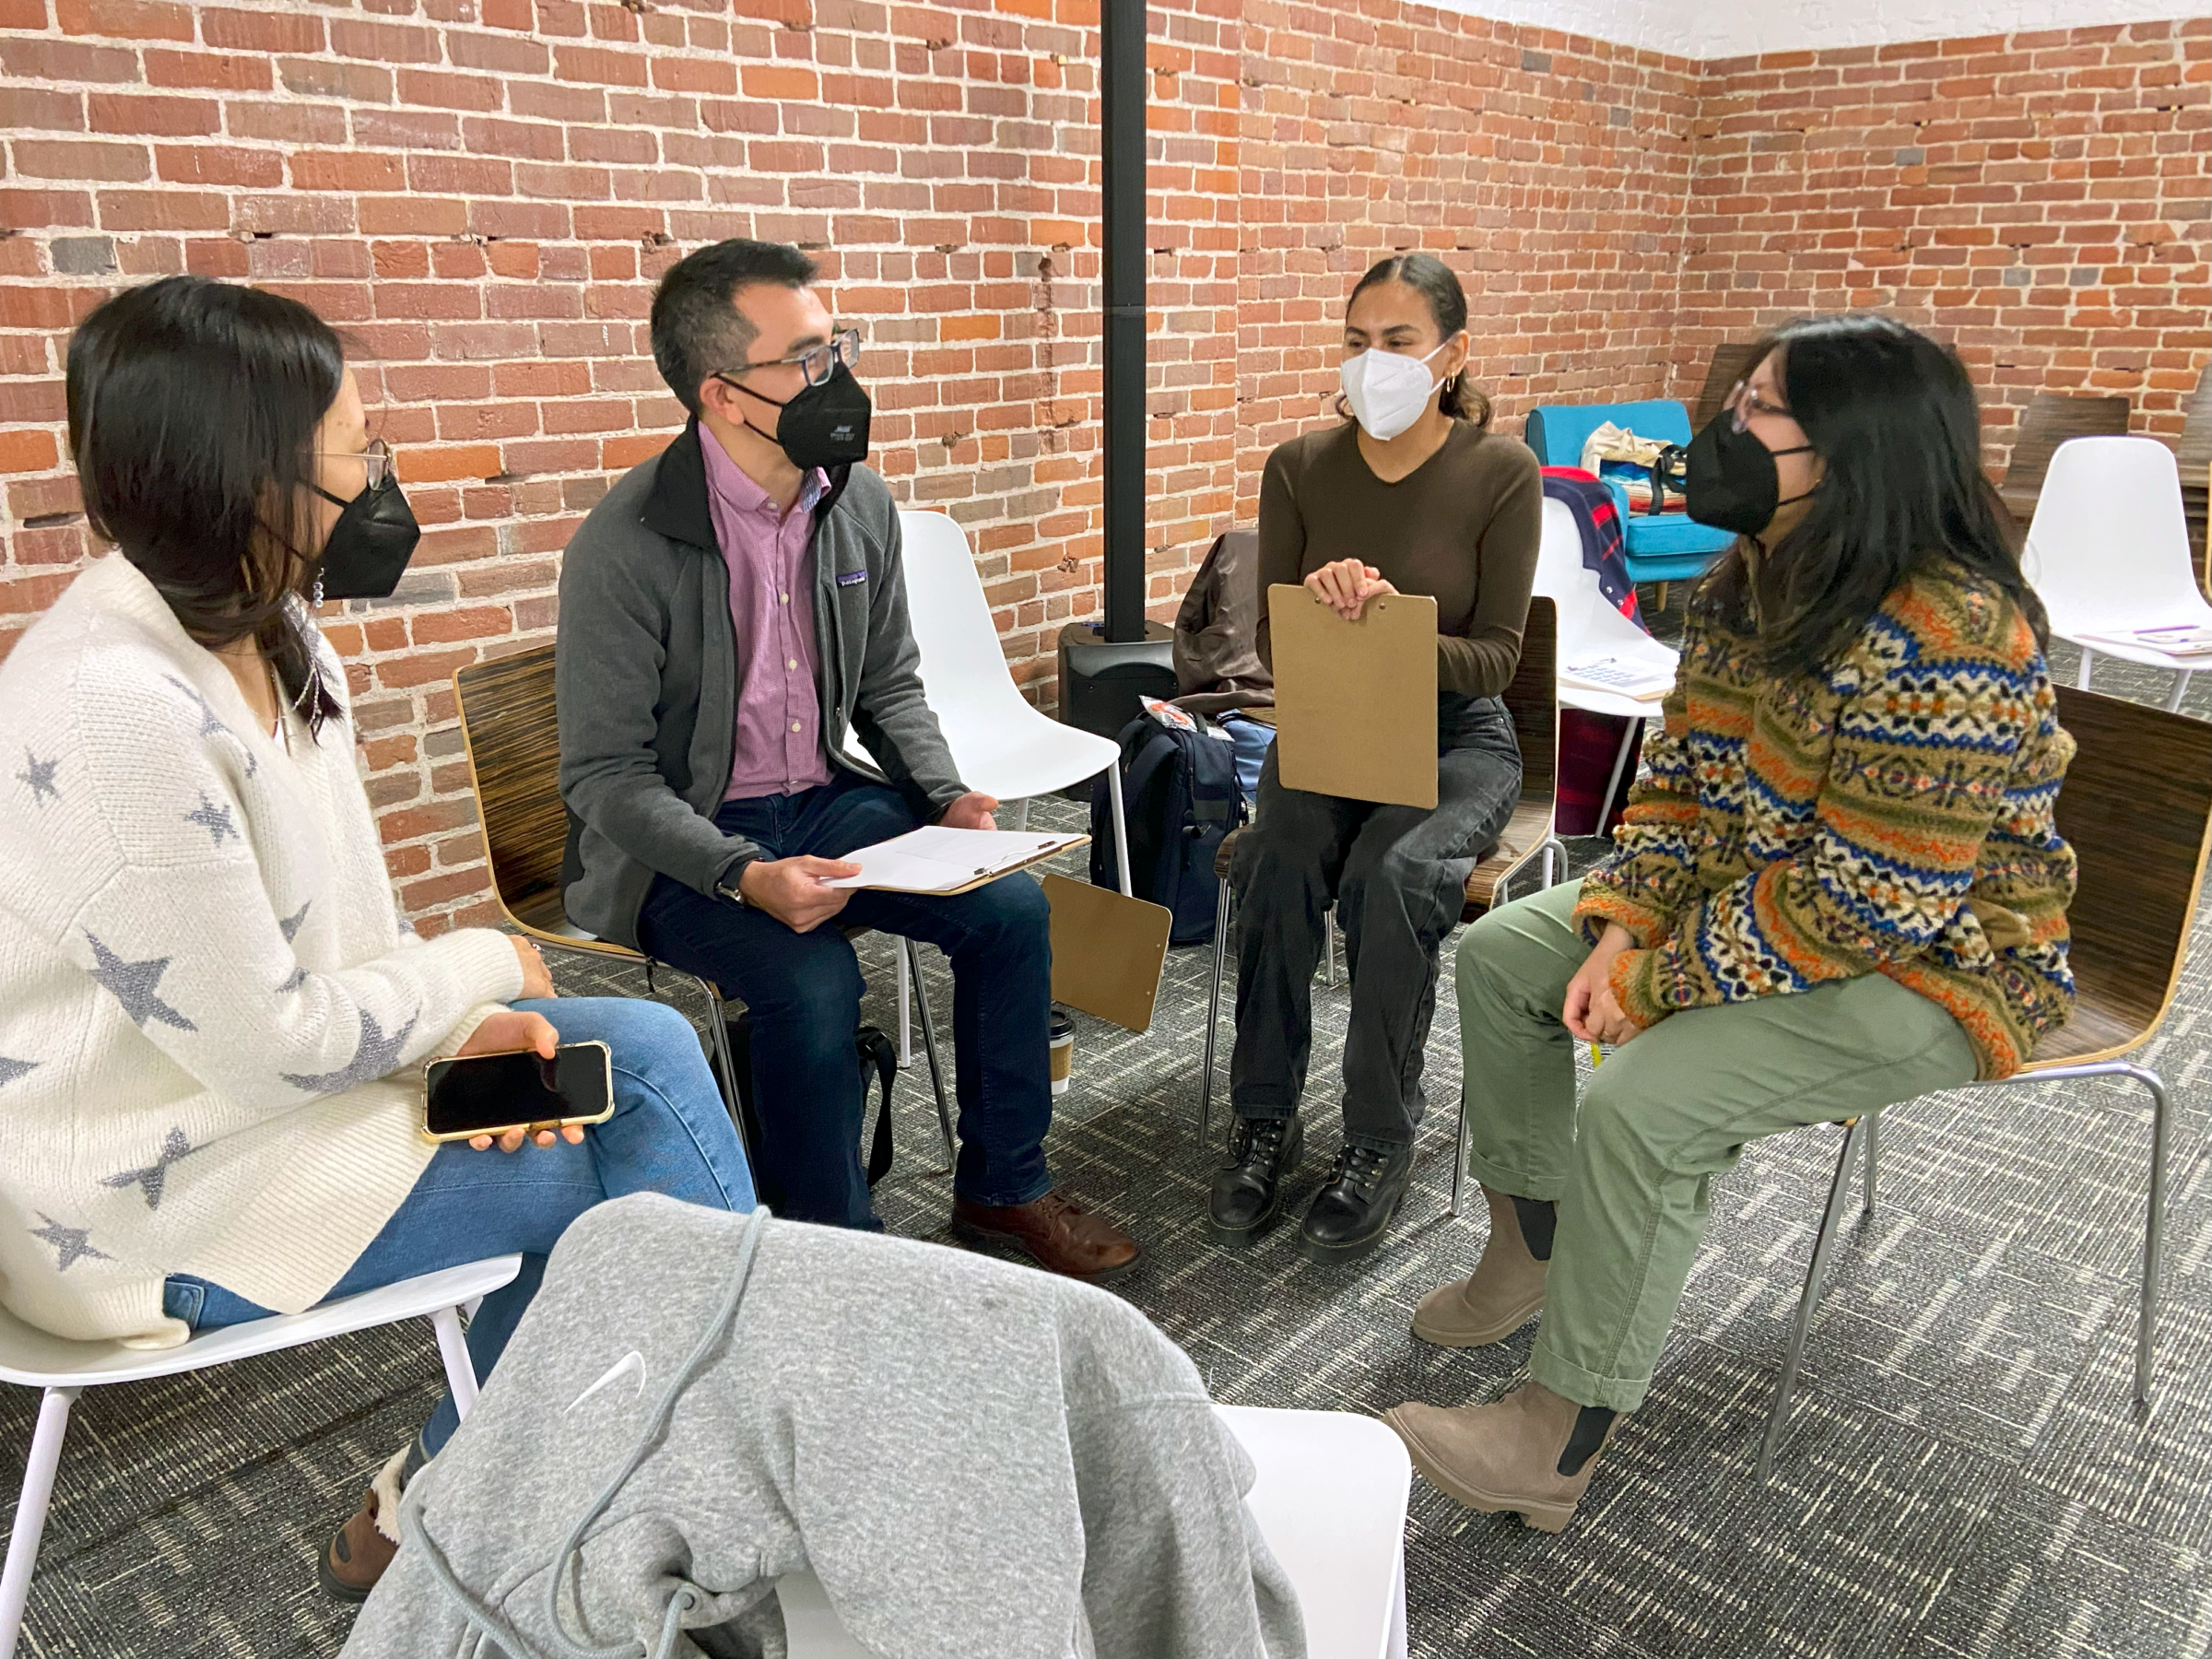 A group of people wear face masks and sit in a circle as they have a discussion. Some hold clipboards.